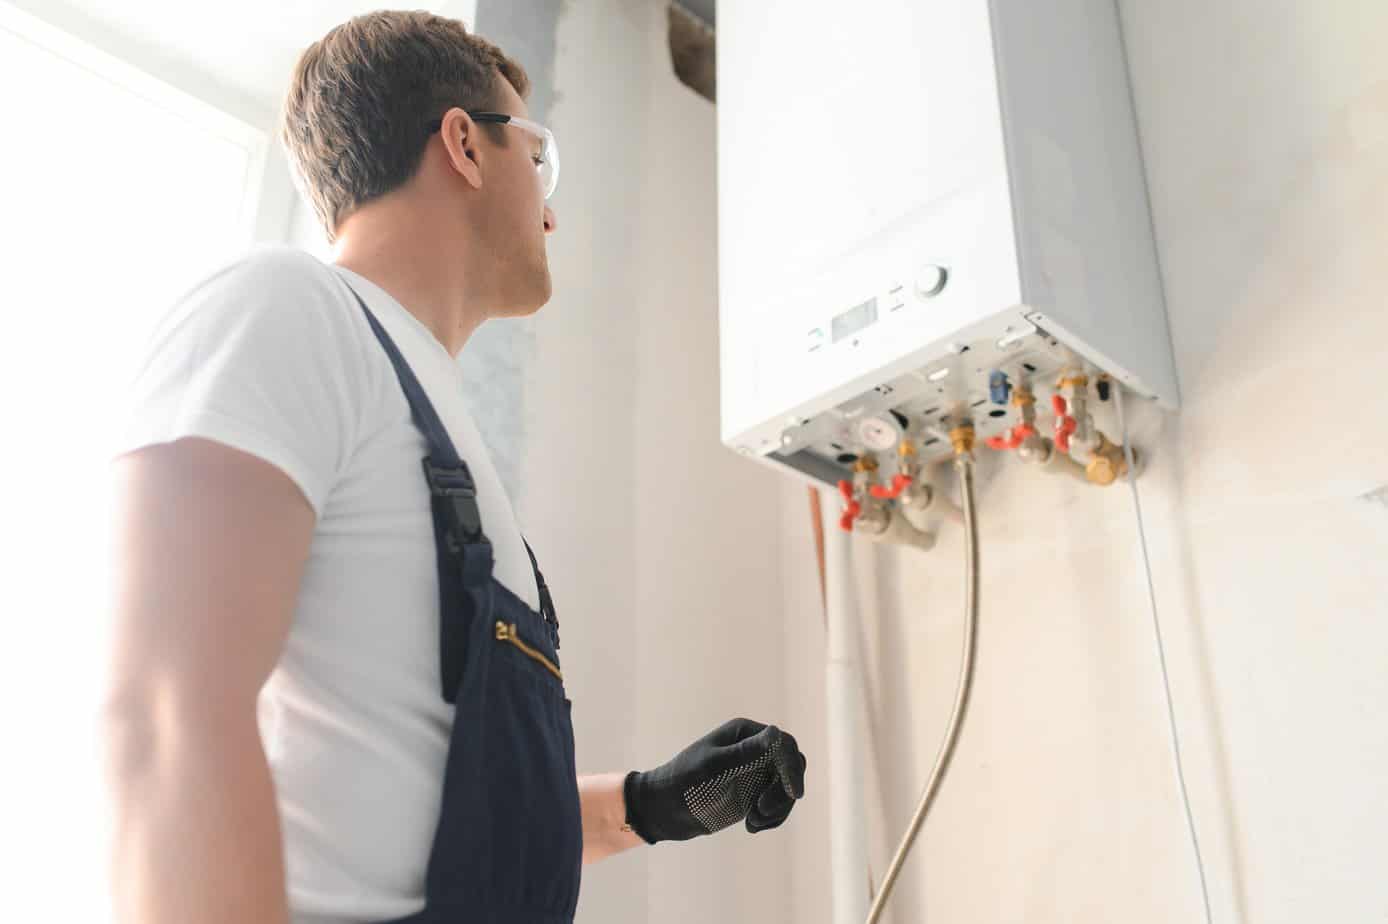 Professional plumber checking a boiler and pipes, boiler service concept